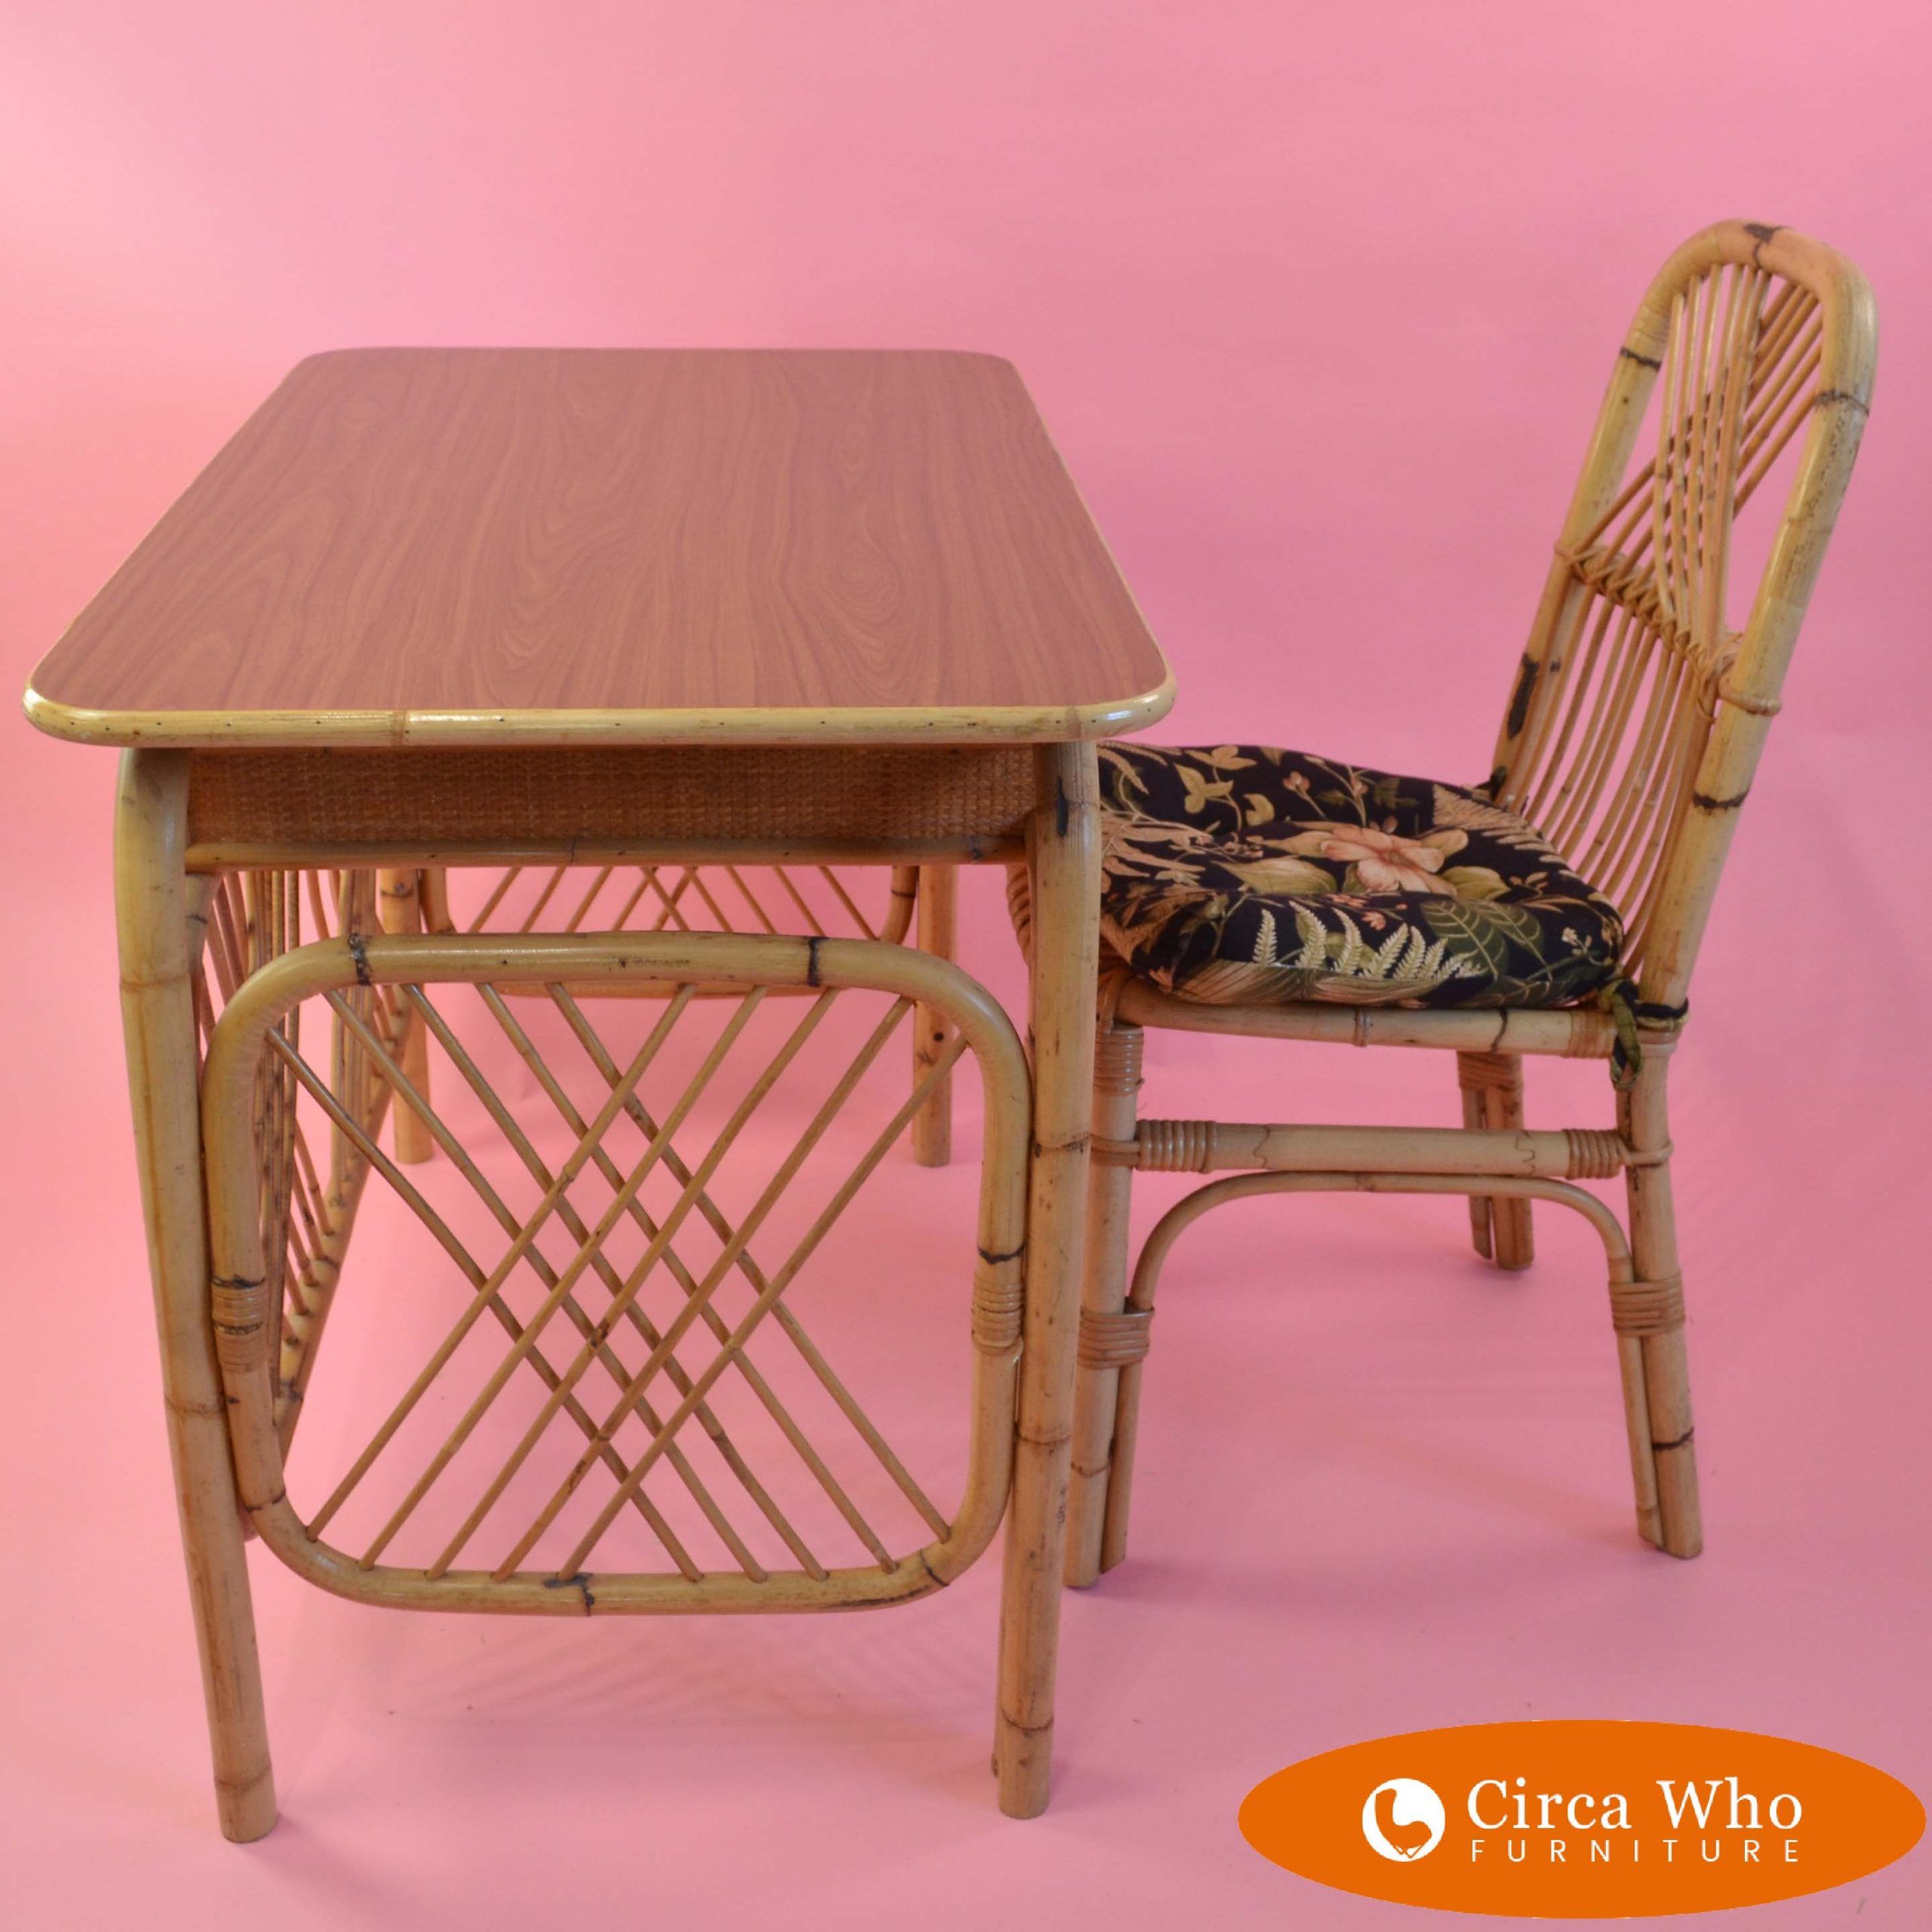 Rattan Desk With Chair | Circa Who Inside Bamboo And Vintage Cream Desks (View 15 of 15)